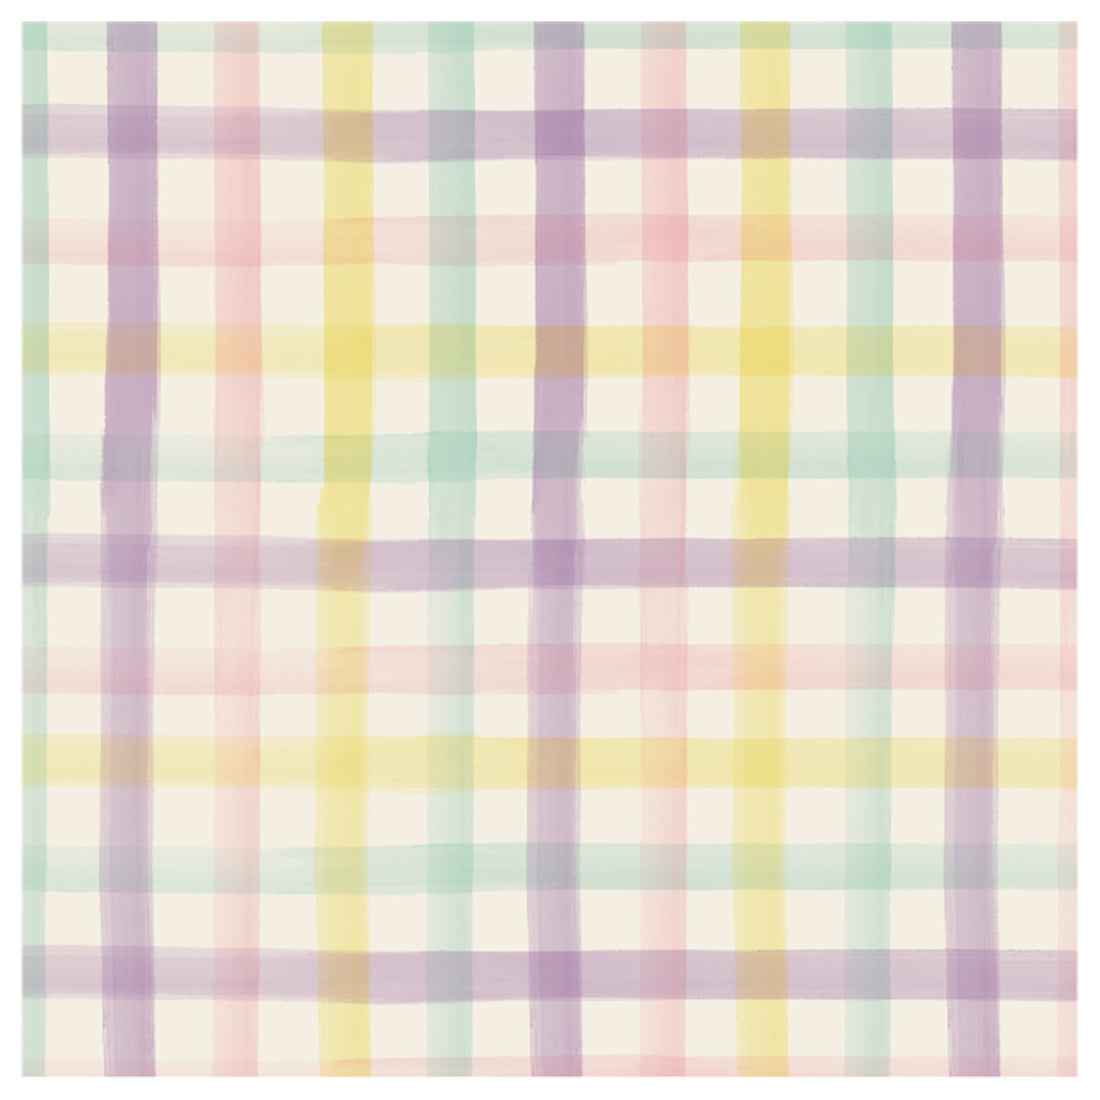 A square cocktail napkin featuring a pastel gingham grid in purple, yellow, seafoam and pink on a white background.